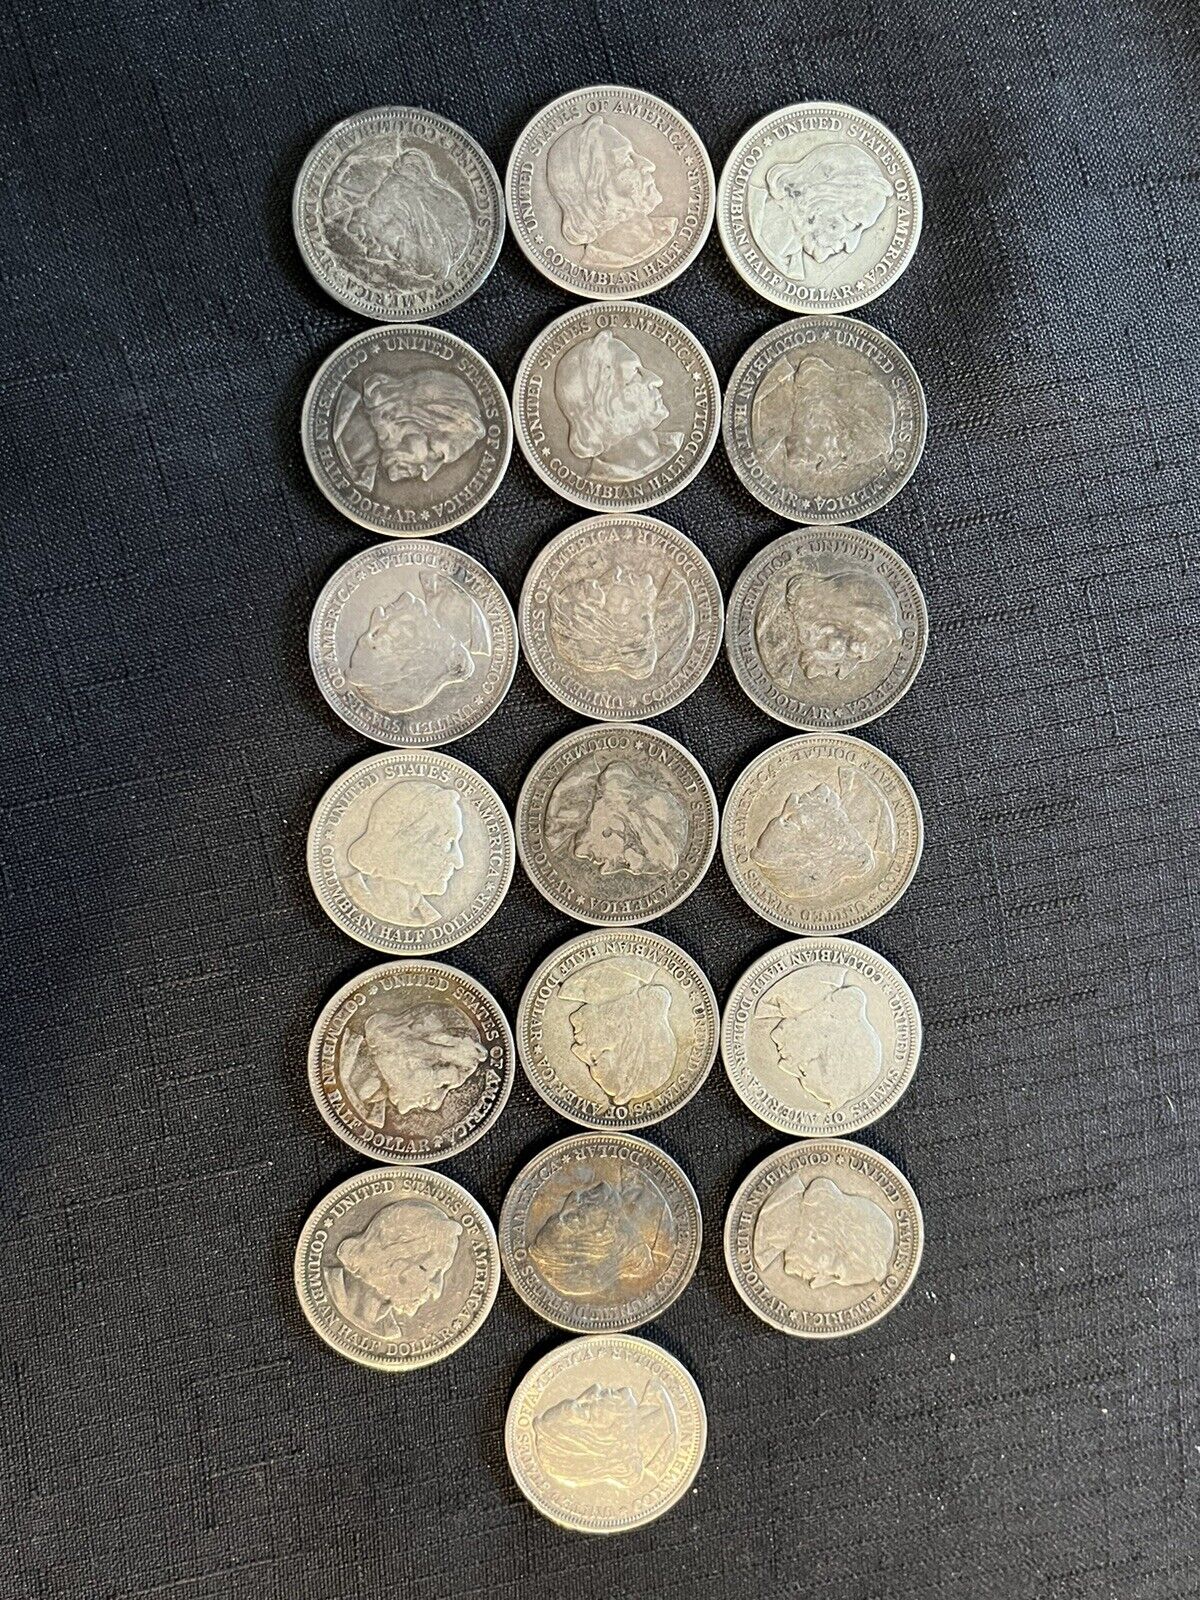 1892 & 1893 Columbian Exposition Half Dollar Coins 90% Silver / Lot Of 19 Coins